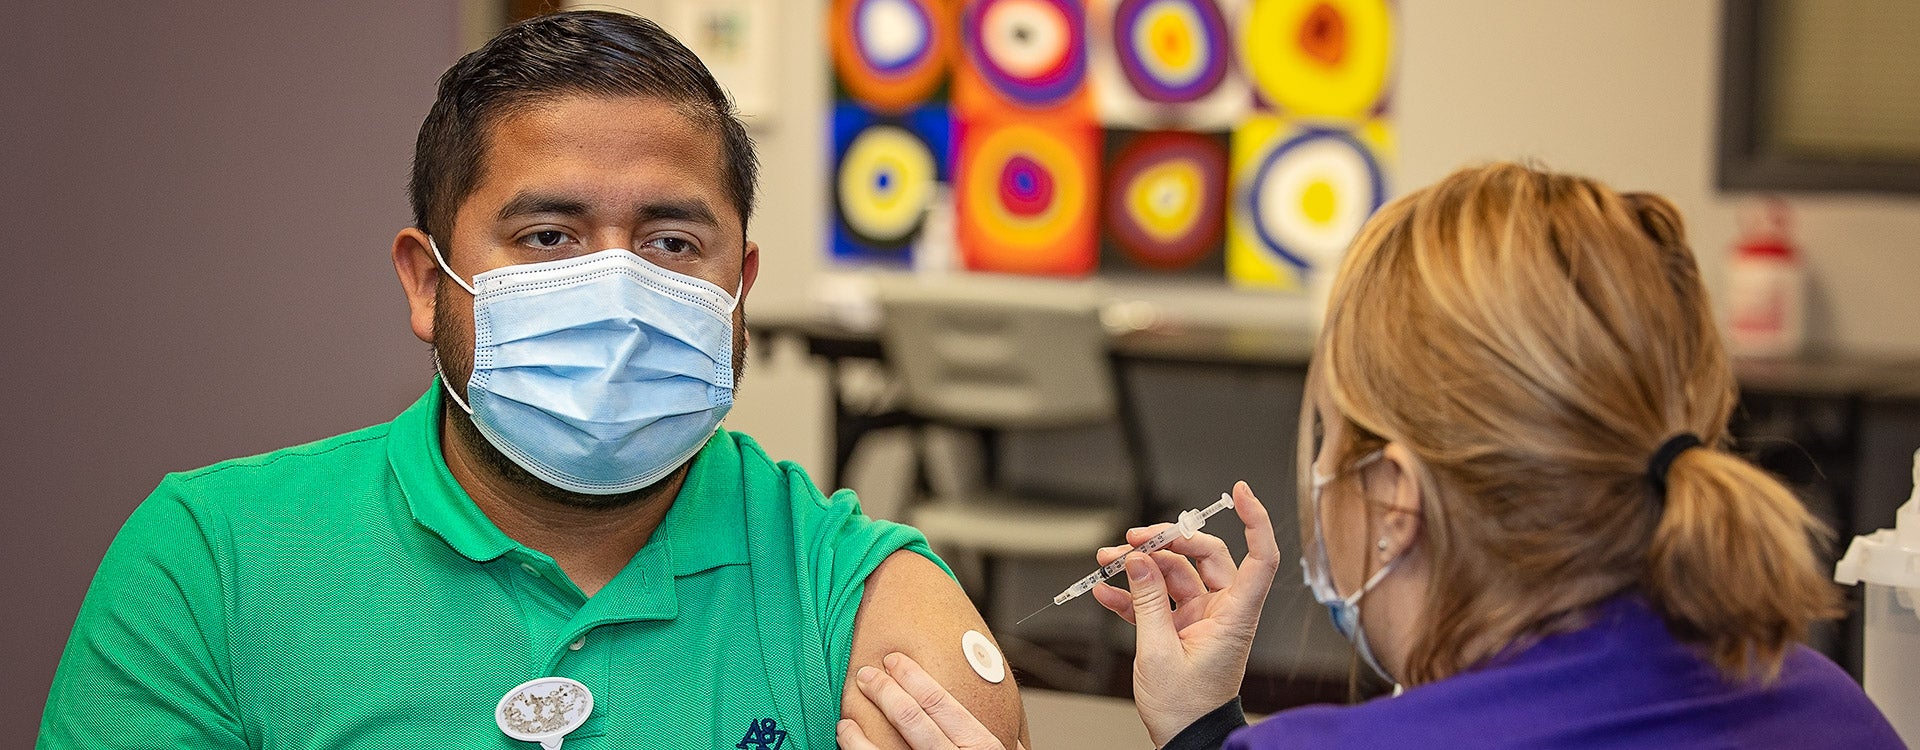 Jonathan Mendez gets vaccinated in the Brody Commons on Jan. 13, 2021, by Erica Turner, RN. (ECU Photo by Cliff Hollis)